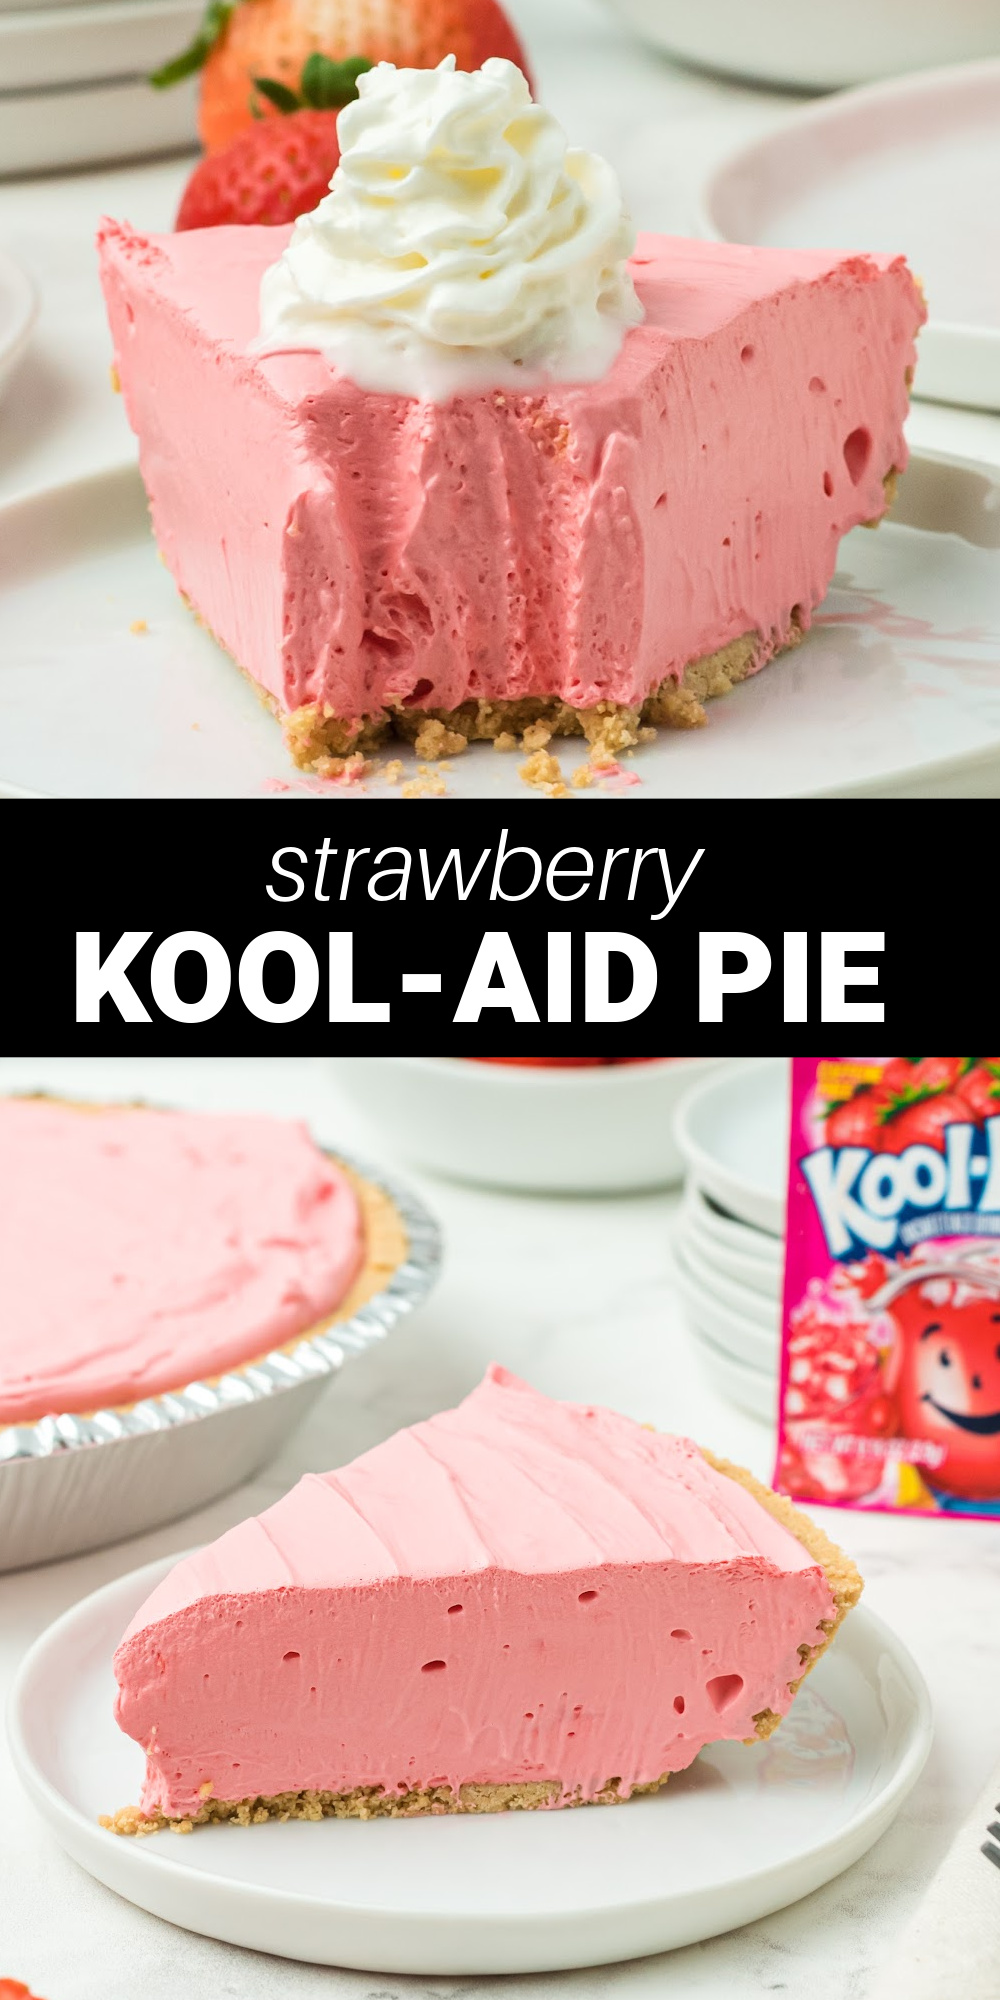 With only 4 simple ingredients, this Kool Aid Pie is a super easy pie recipe that makes an AH-mazingly cool, refreshing and delicious dessert. And because of the bright and pretty colors it's guaranteed to be all the kids' favorite sweet treat!